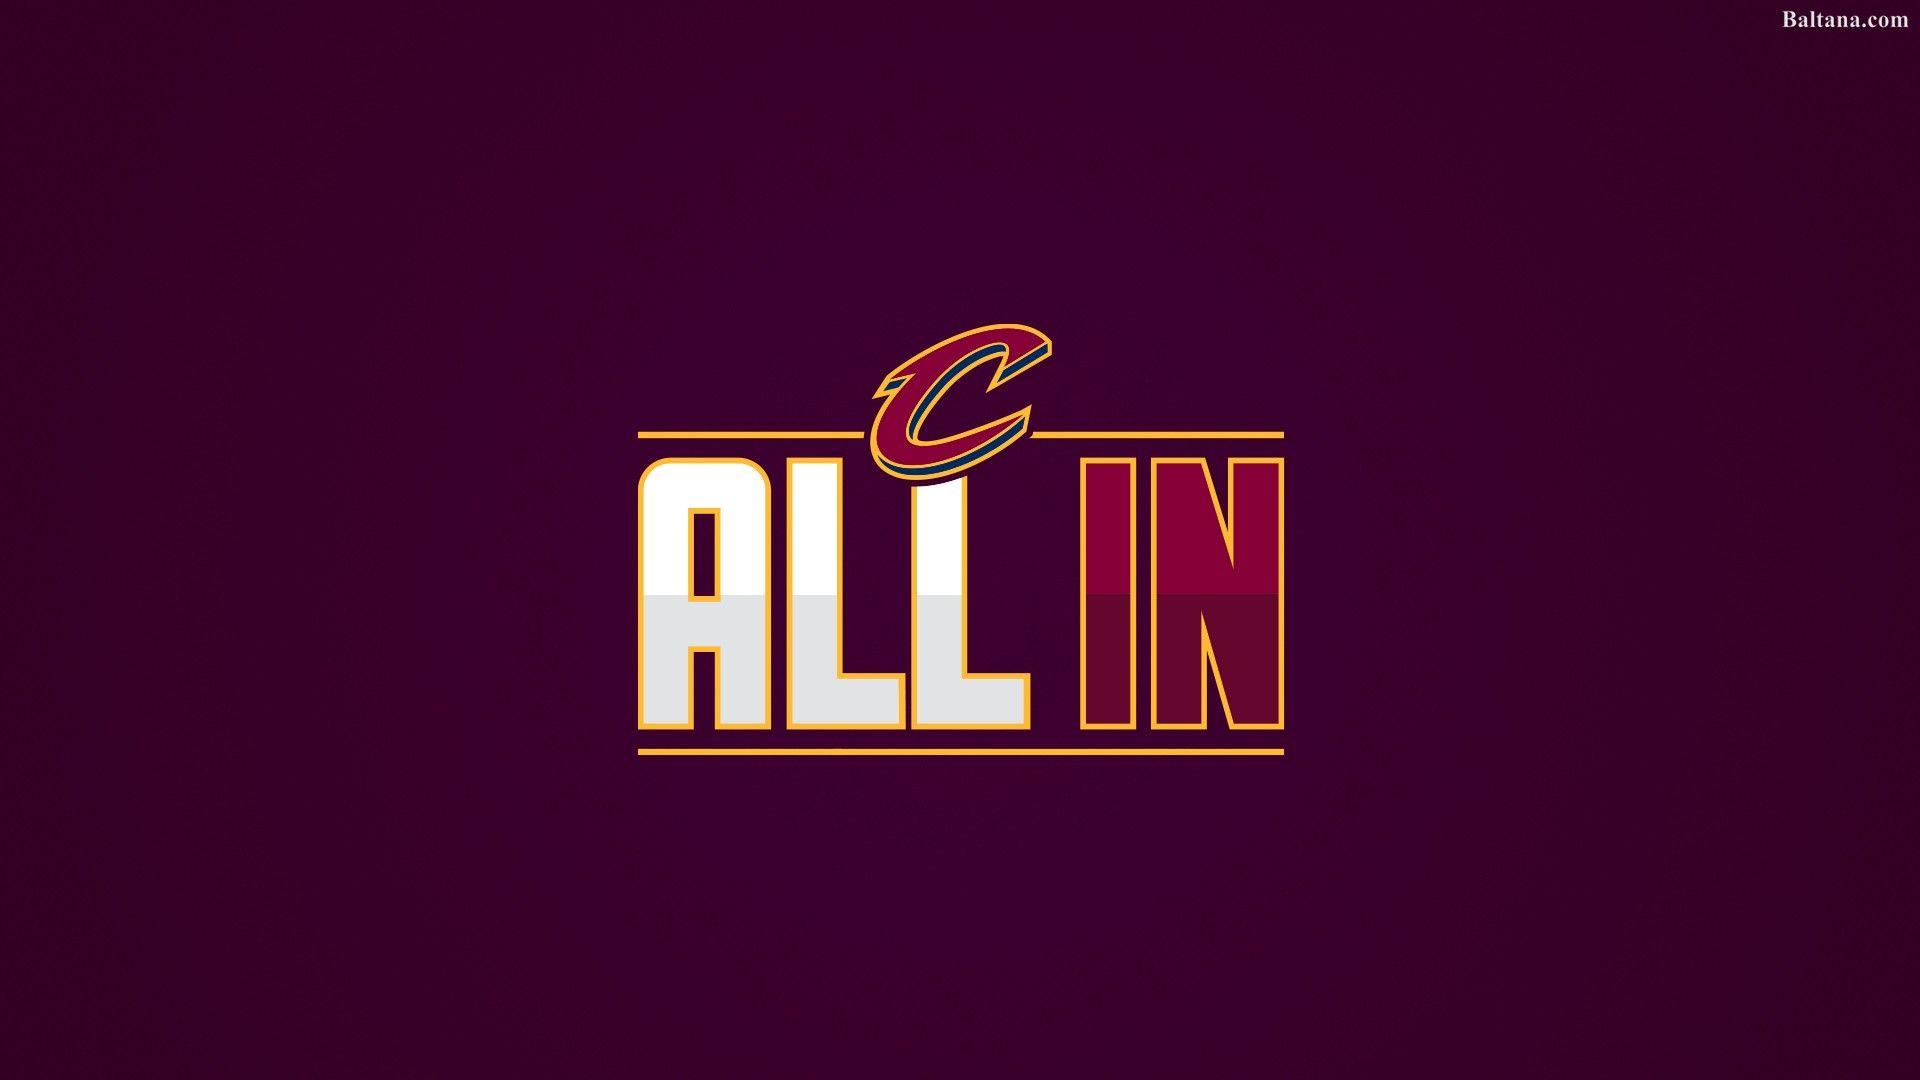 Cleveland Cavaliers Background HD Wallpaper 33443